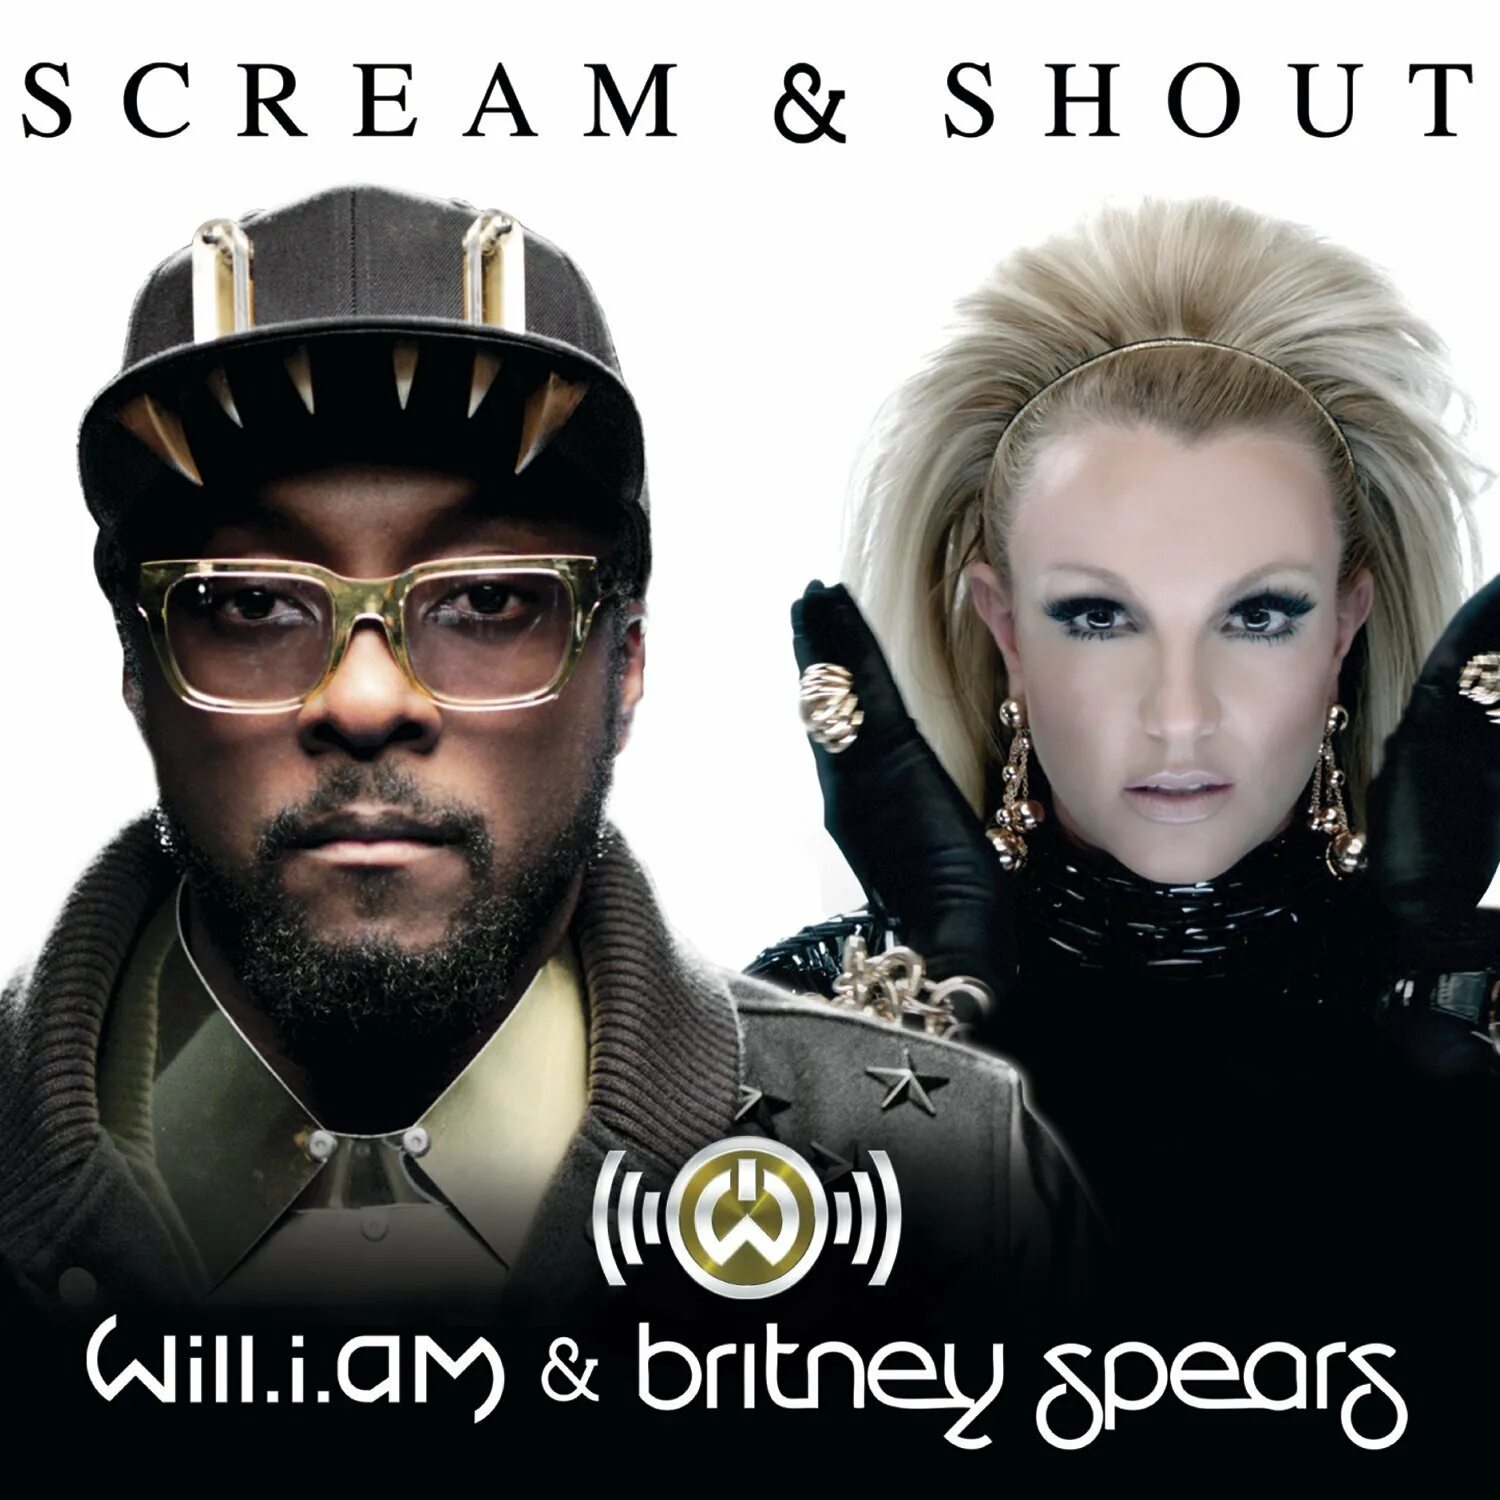 I wanna scream and shout. Will.i.am - Scream & Shout ft. Britney Spears. Britney Spears William. Бритни Спирс Scream and Shout. Scream and should Britney Spears обложка.